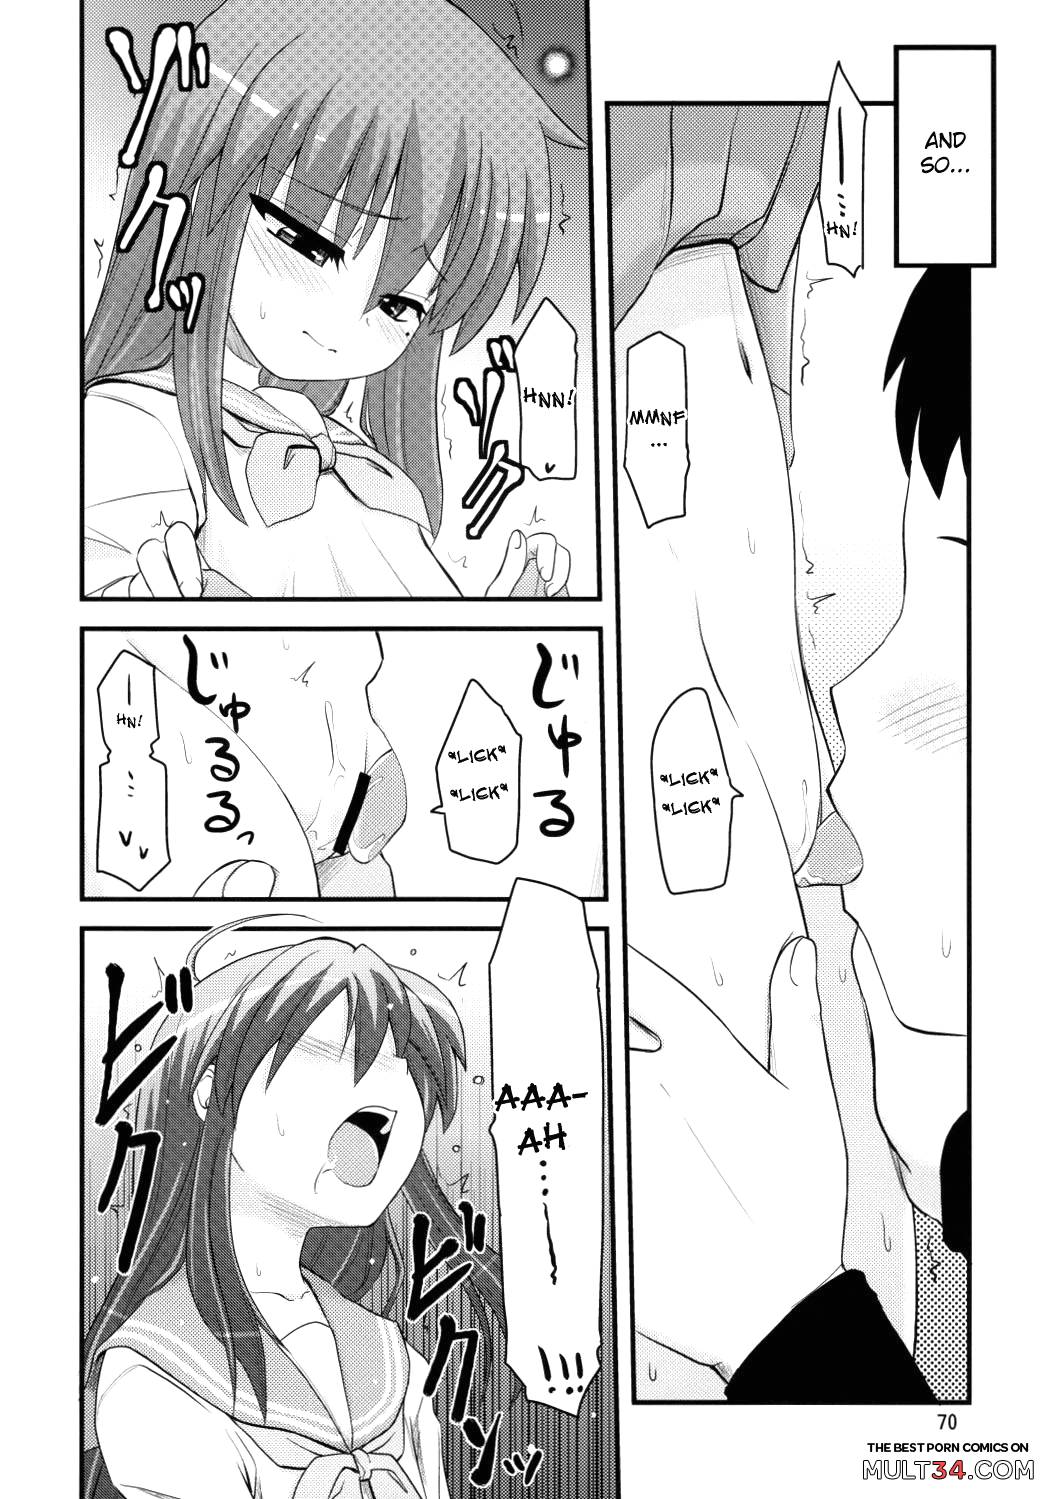 Konata and Oh-zu 4 people each and every one + 1 page 66